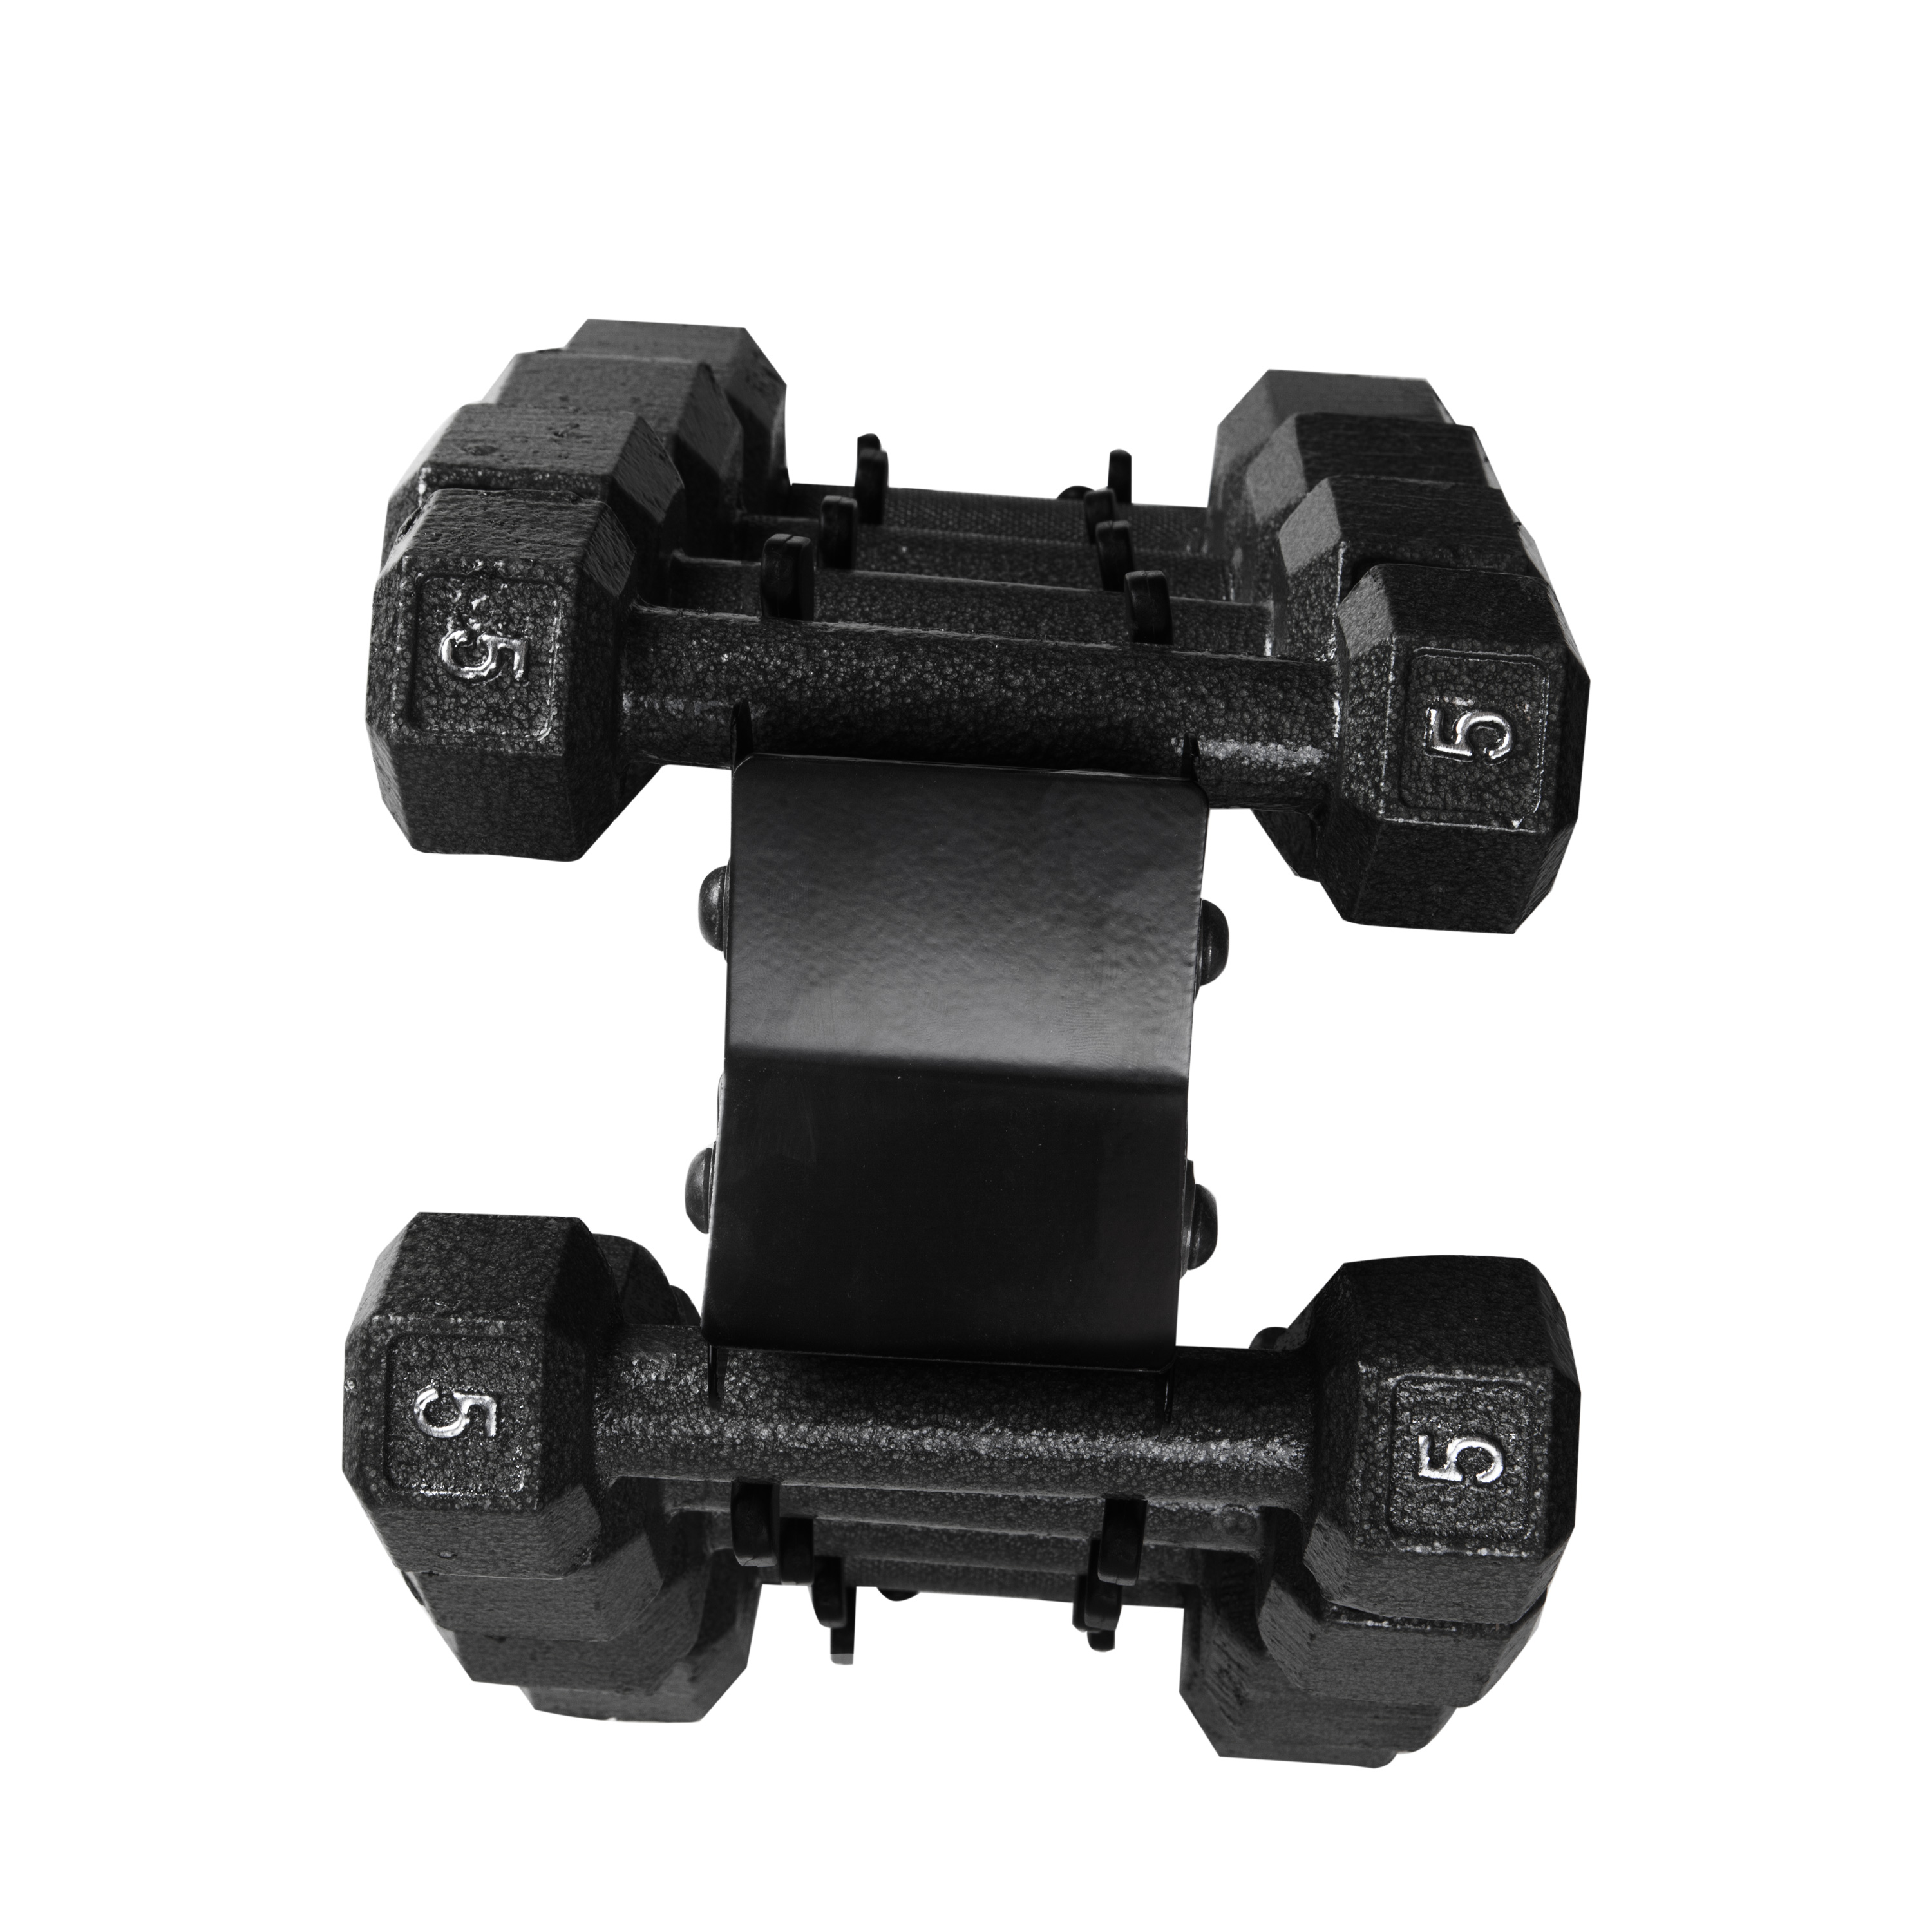 Cap Barbell 100 lb Cast Iron Hex Dumbbell Weight Set with Rack, Black - image 5 of 7